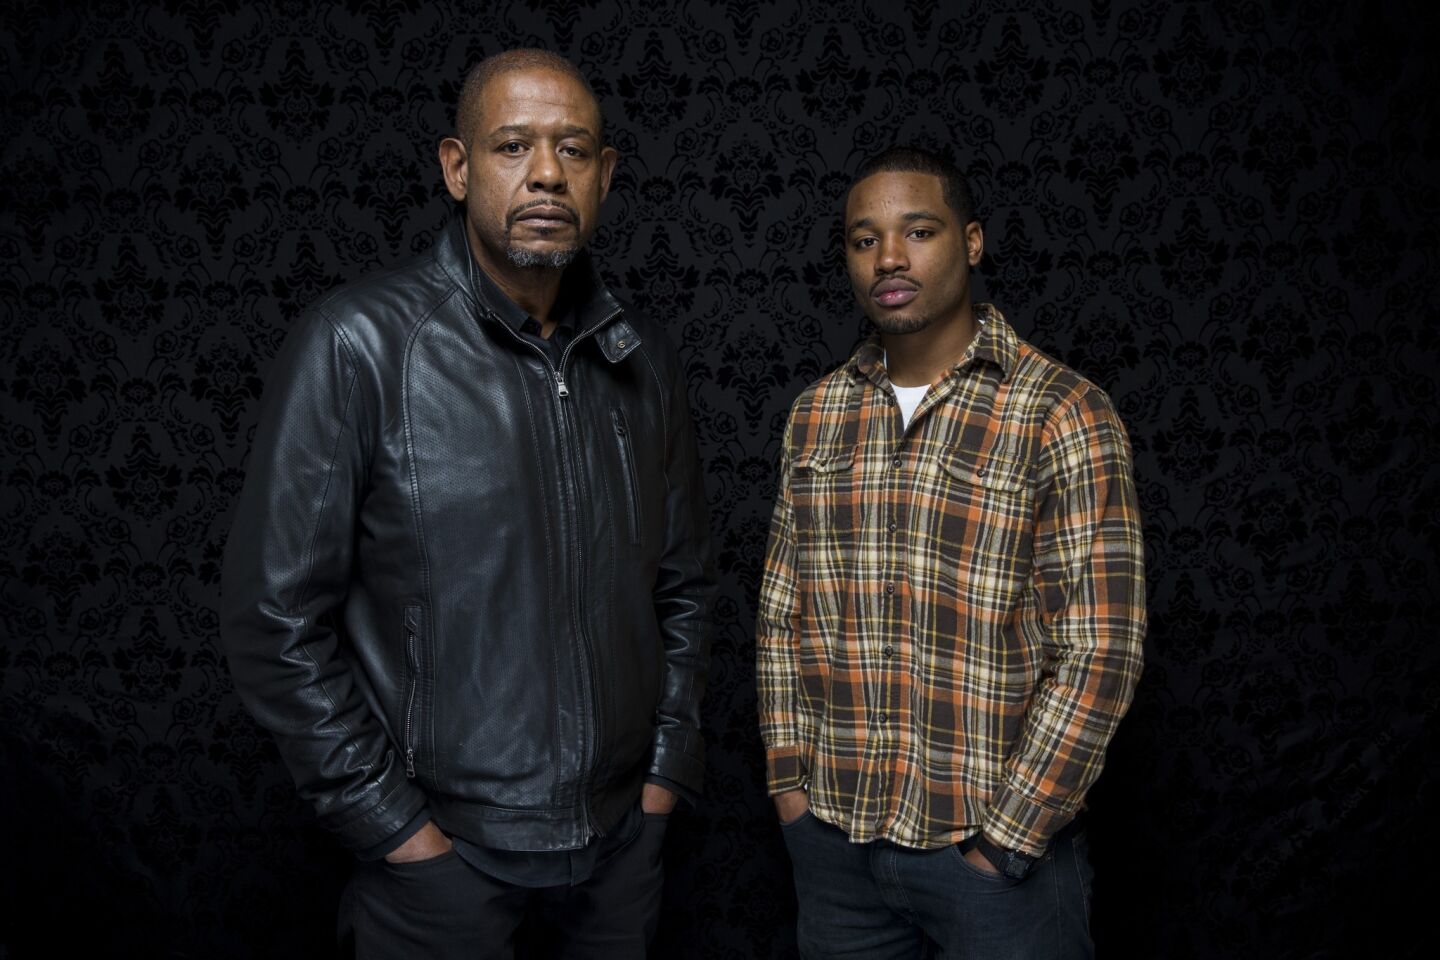 Forest Whitaker, producer, and writer and director Ryan Coogler, from the film "Fruitvale Station." The film debuted at the 2013 Sundance Film Festival, winning the Grand Jury Prize and the Audience Award for U.S. dramatic film.